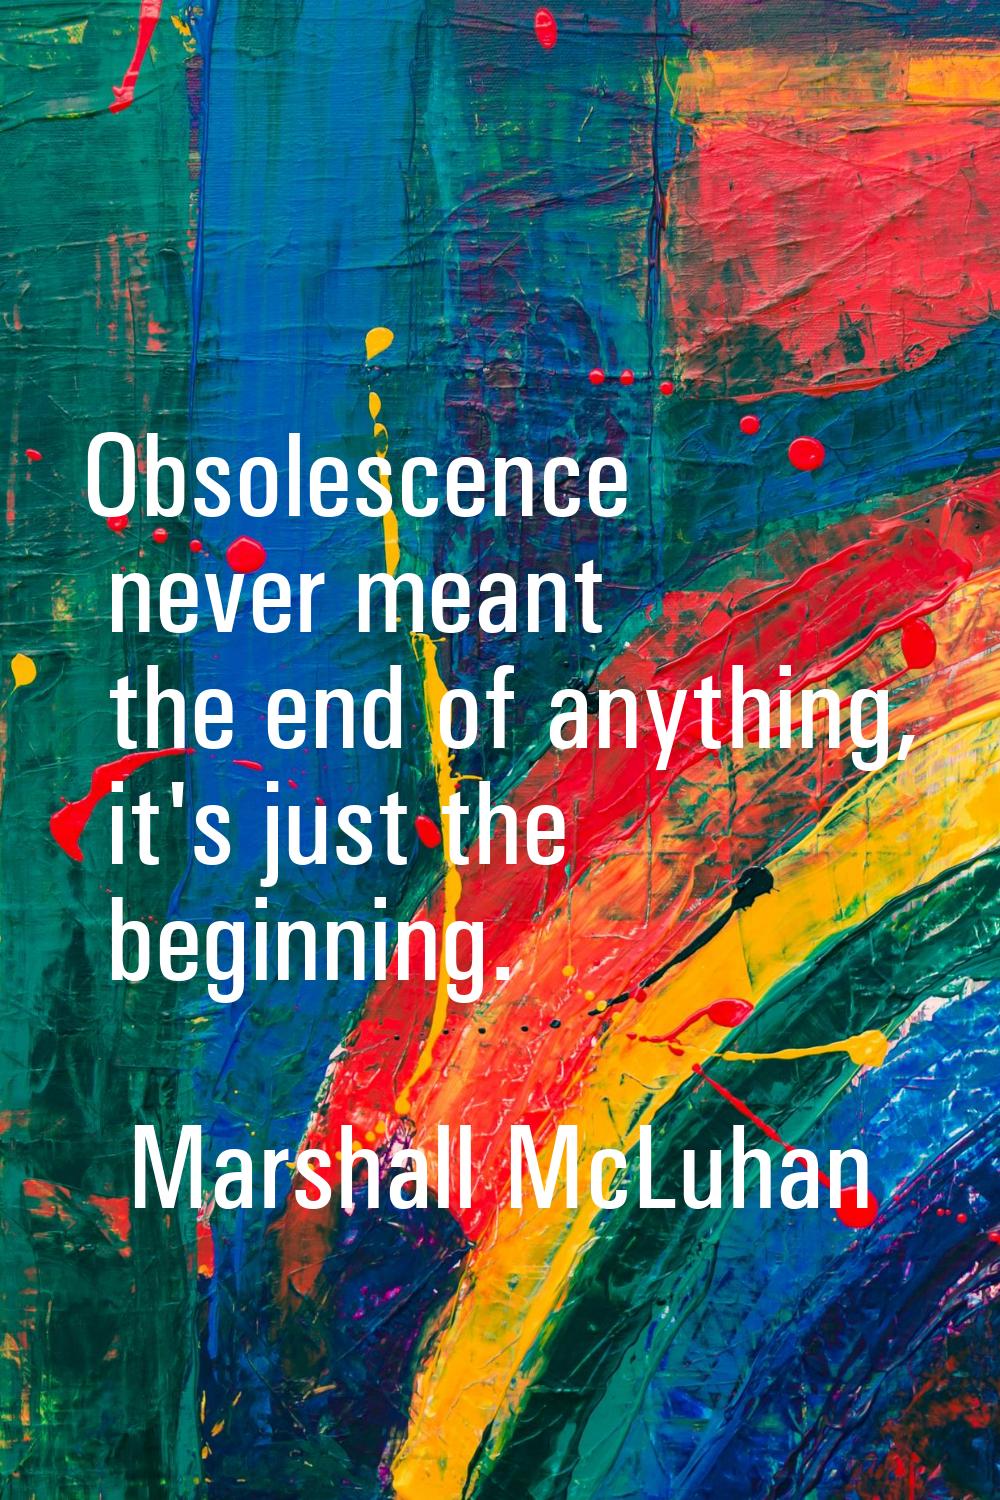 Obsolescence never meant the end of anything, it's just the beginning.